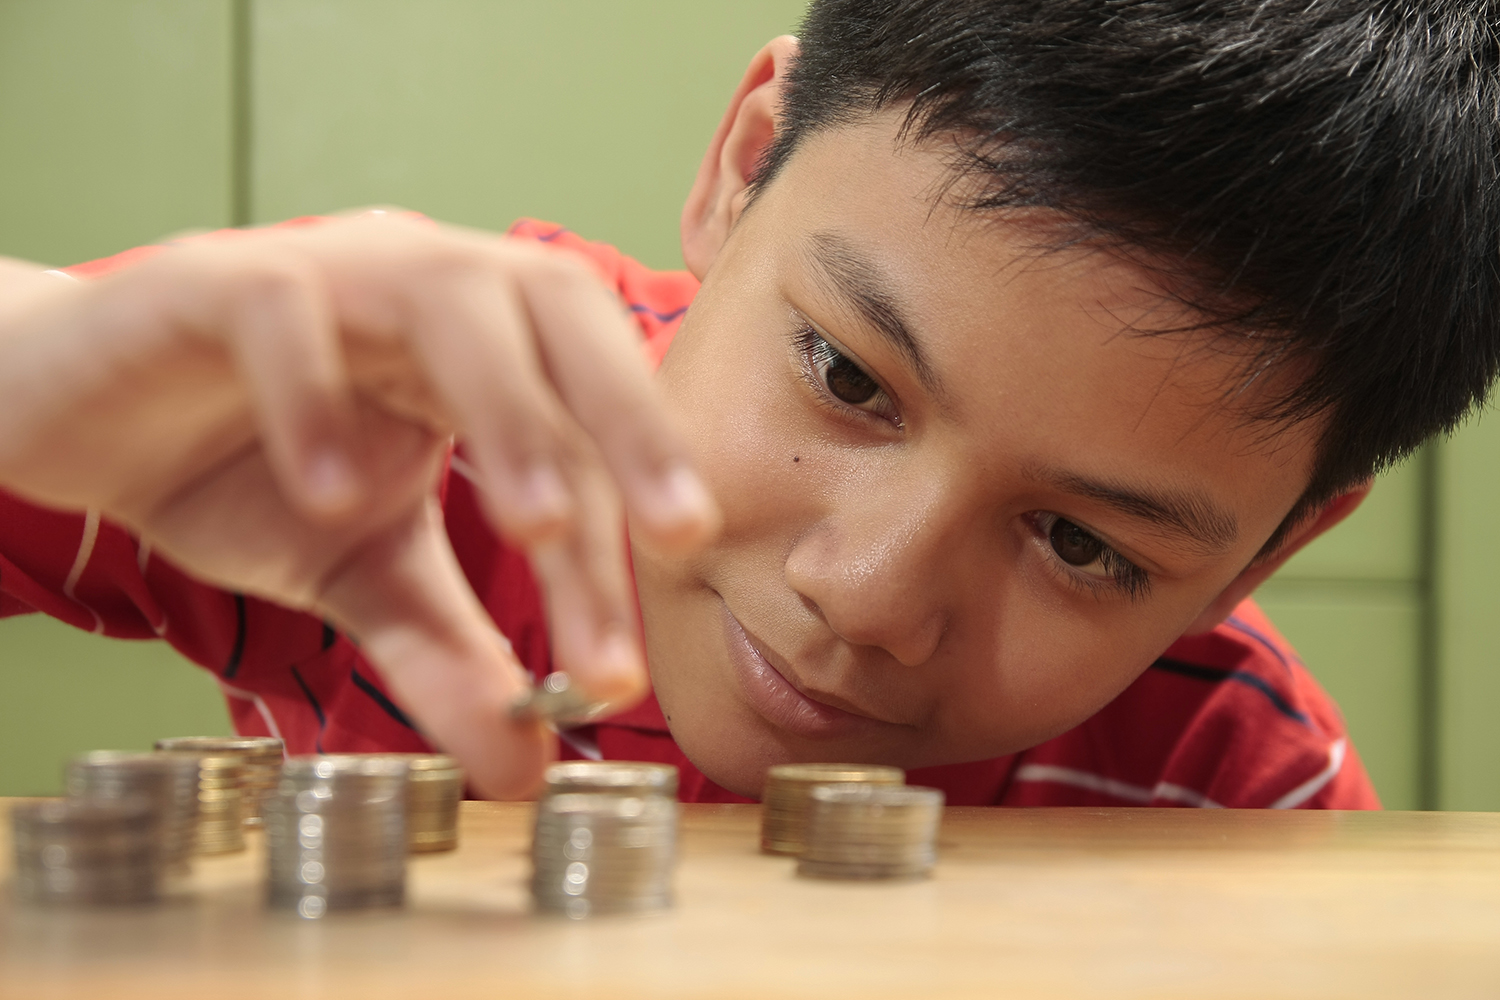 A photo of a boy stacking a pile of coins